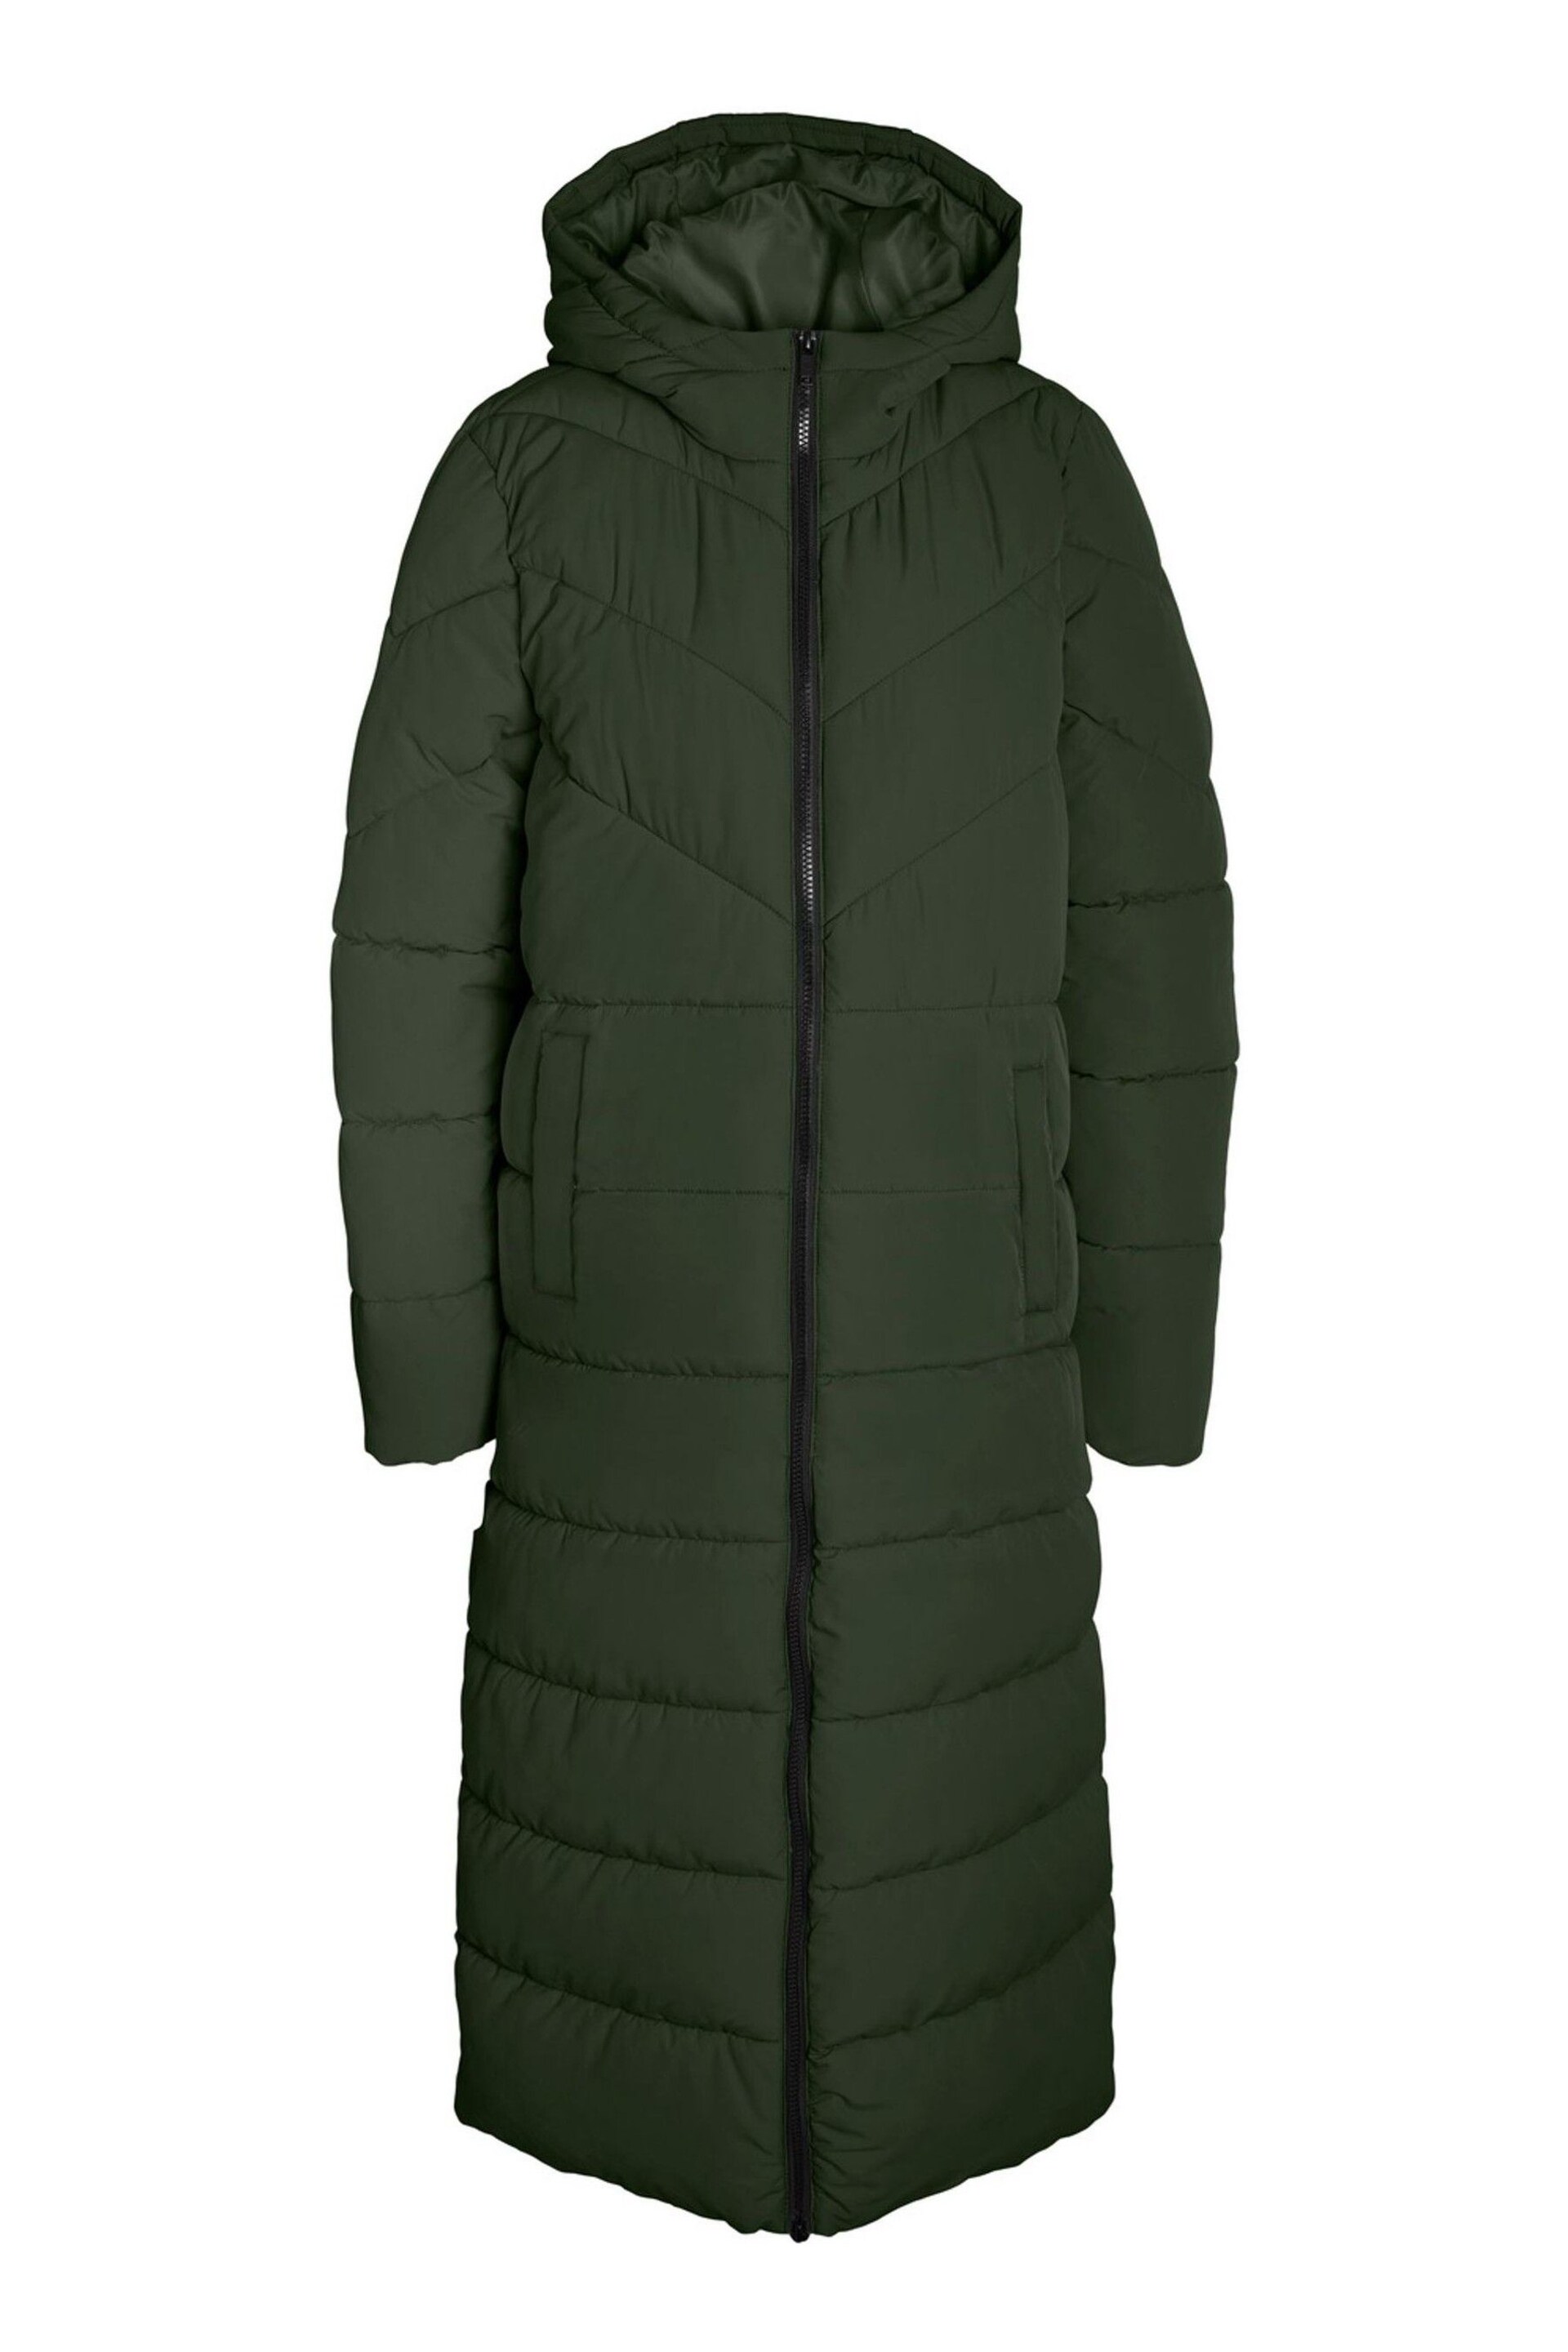 NOISY MAY Green Maxi Length Padded Quilted Hooded Coat - Image 6 of 6